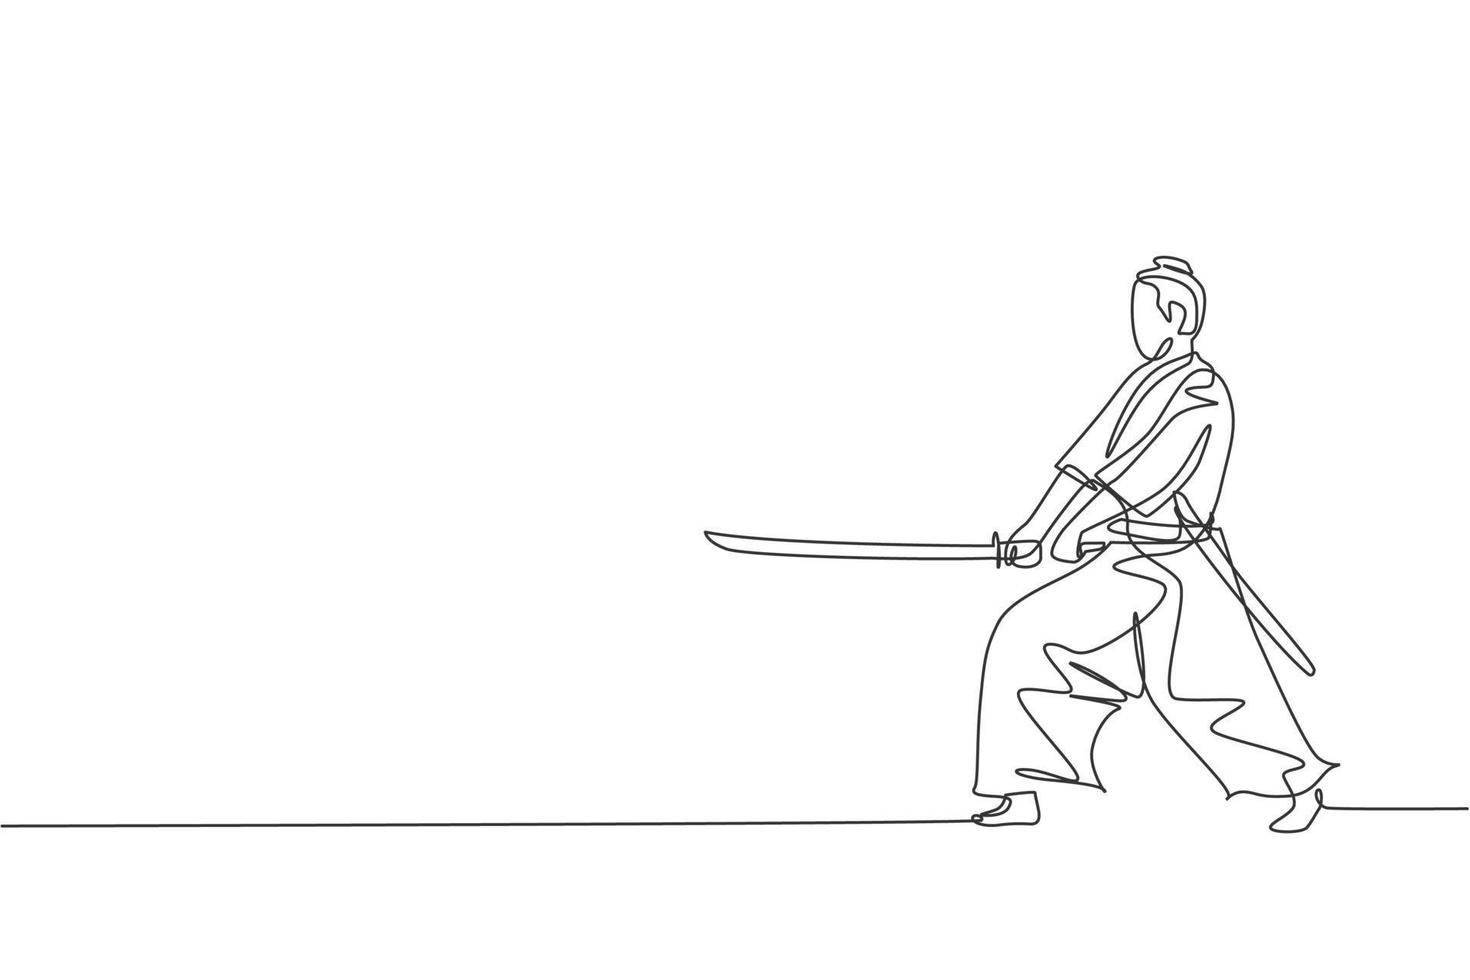 One single line drawing of young Japanese samurai warrior holding katana sword practicing at dojo center vector graphic illustration. Combative martial art concept. Modern continuous line draw design